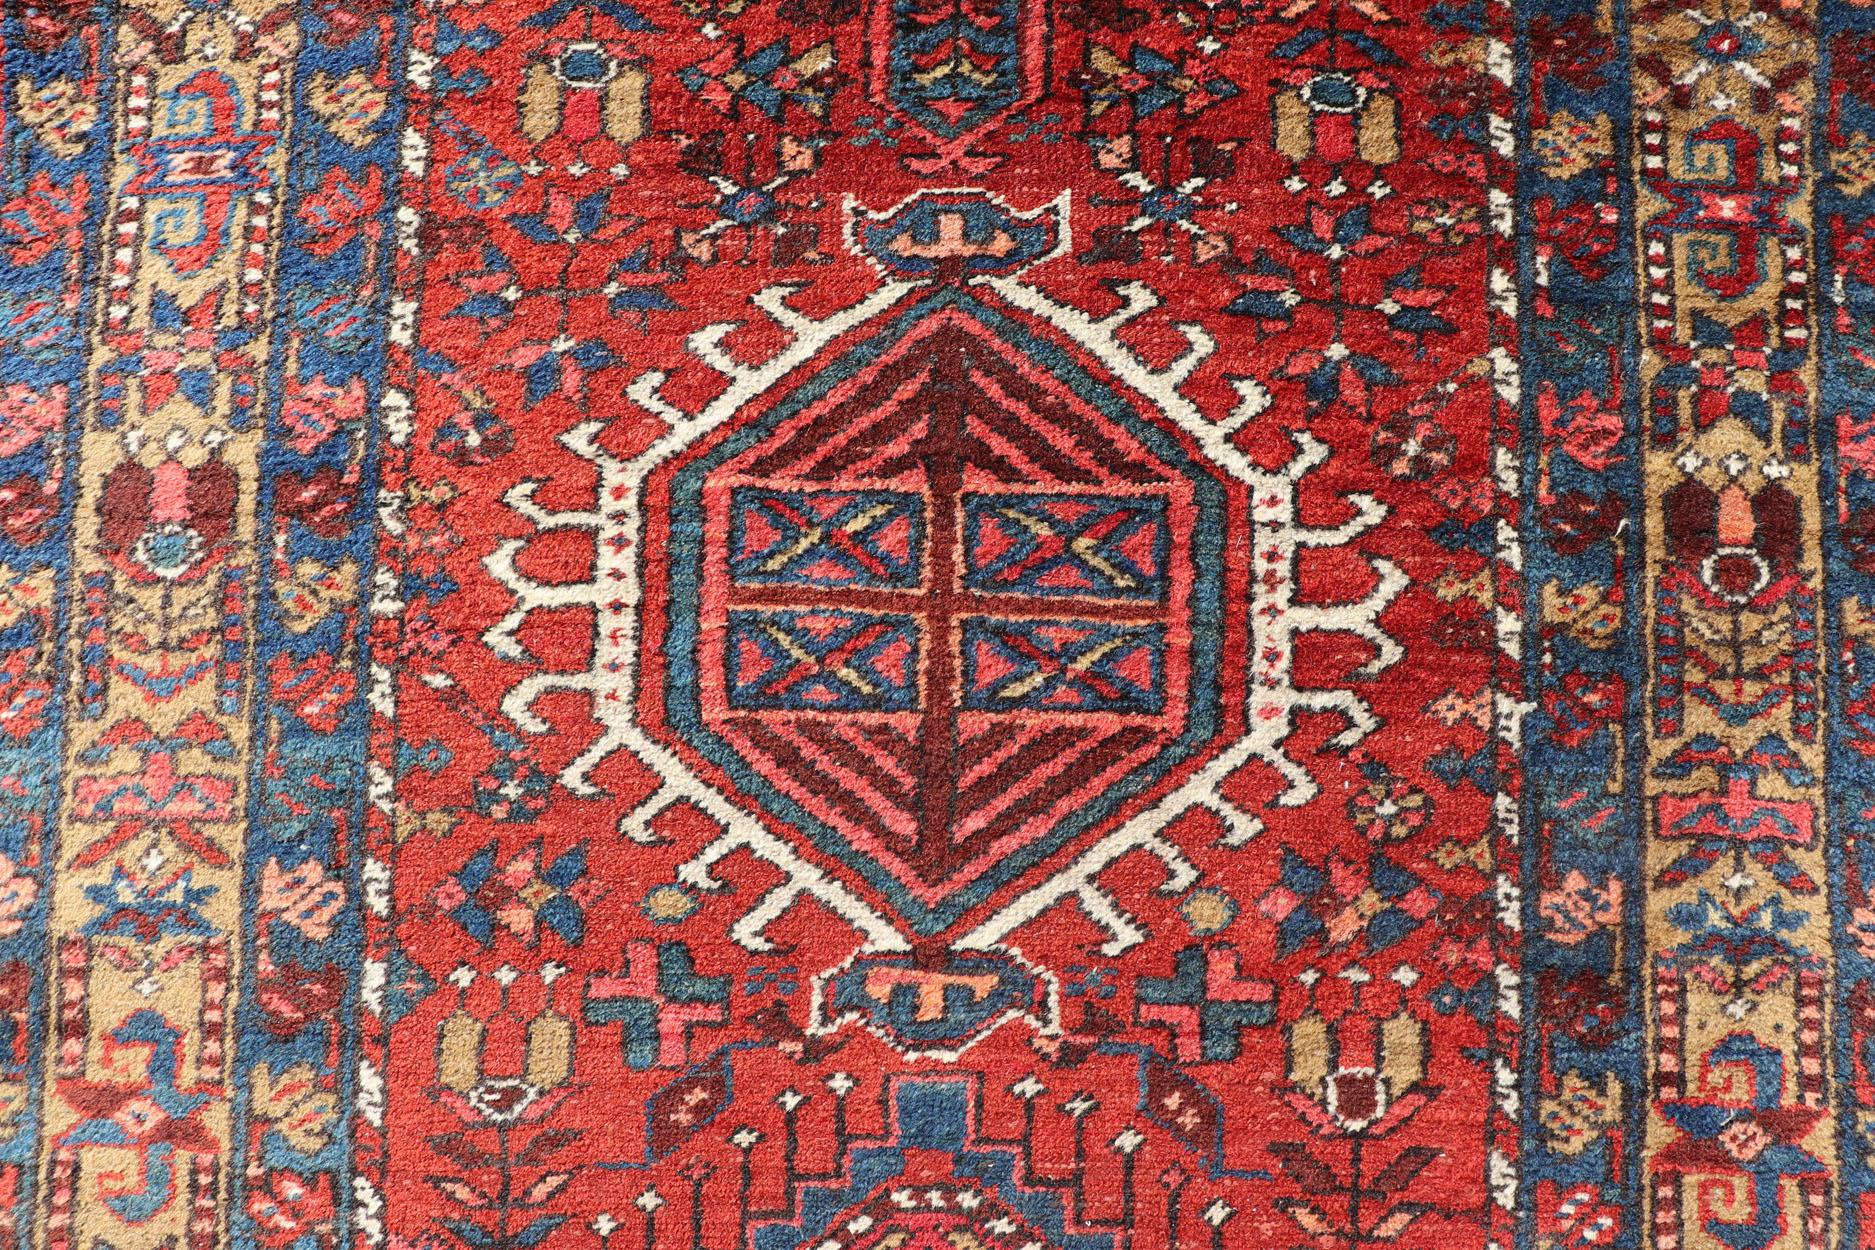 Antique Geometric Persian Long Heriz Runner in Red, Blue, Yellow, Teal, Orange For Sale 3